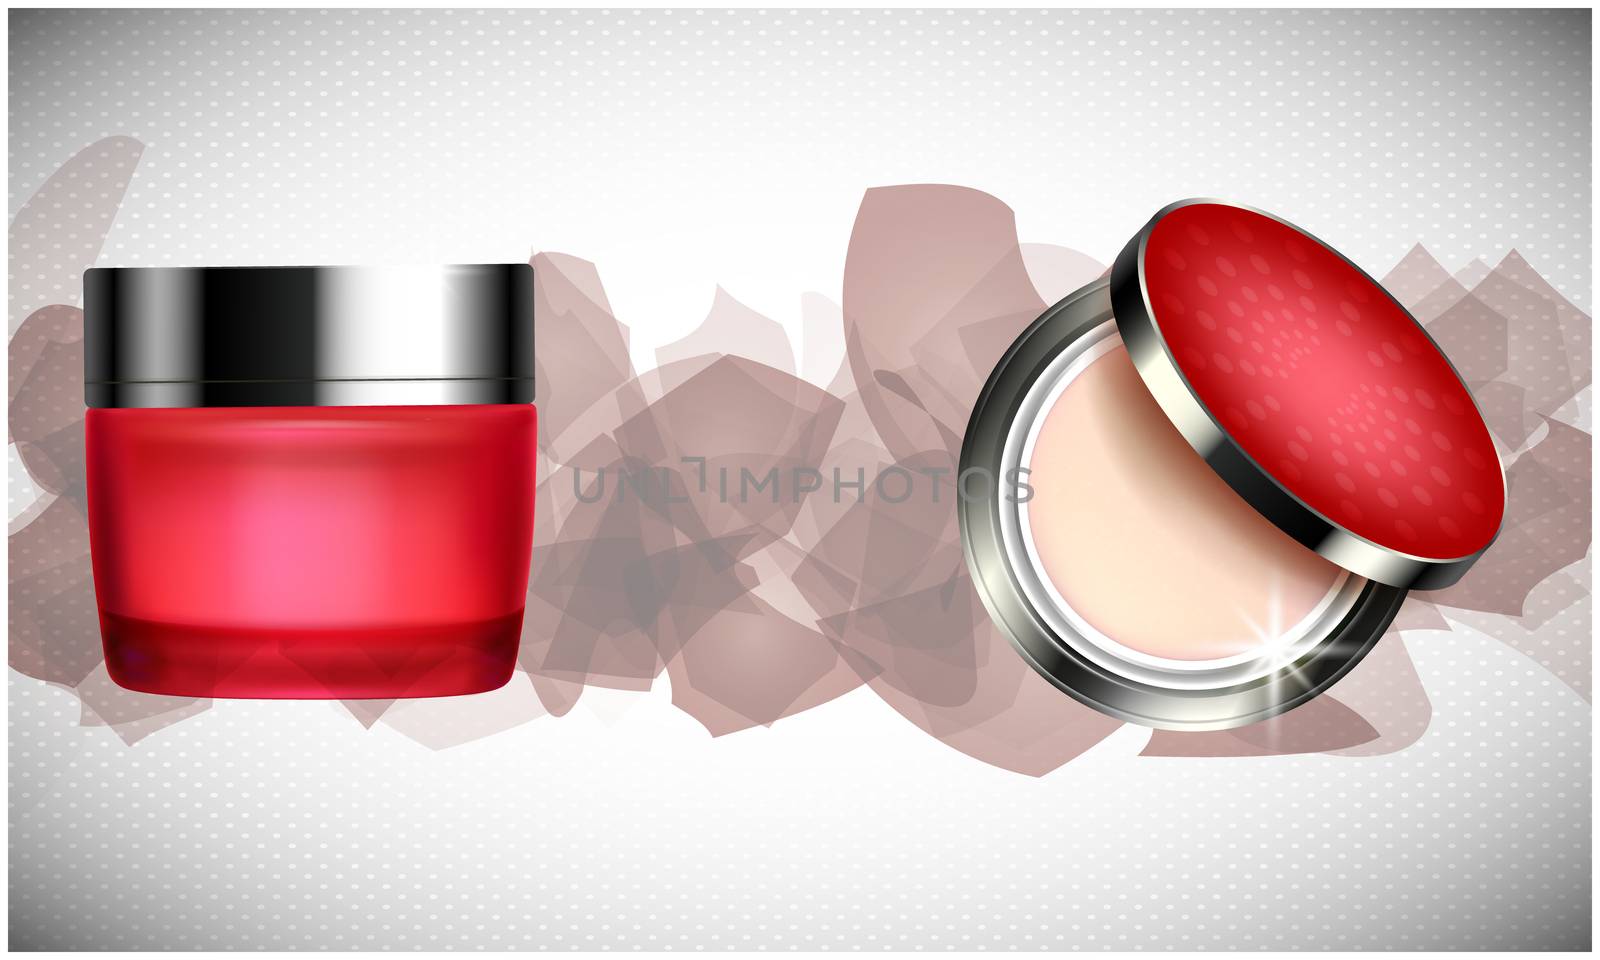 mock up illustration of beauty product on abstract background